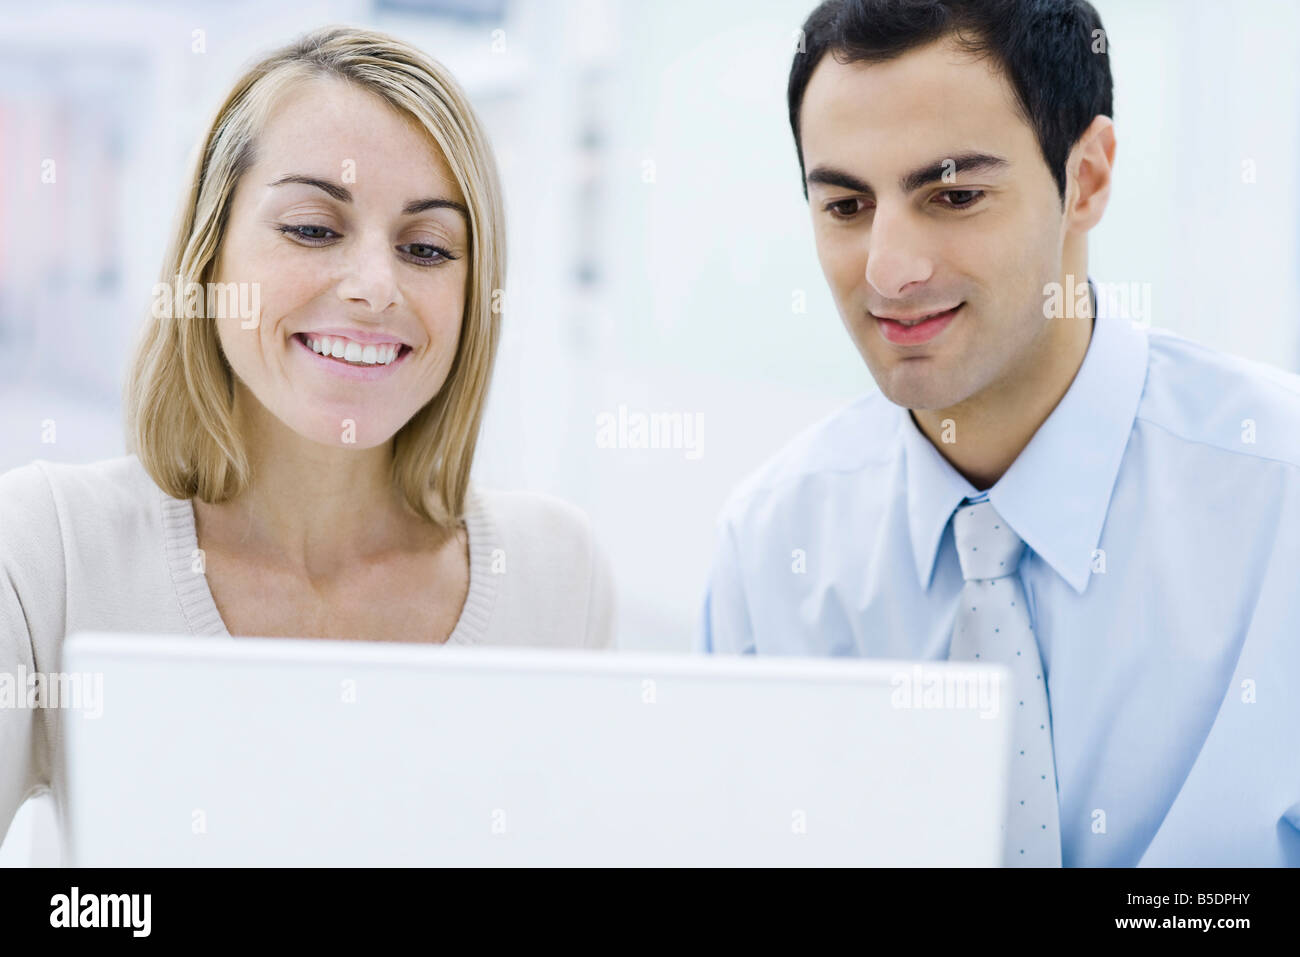 Two professionals looking at laptop computer together, smiling Stock Photo